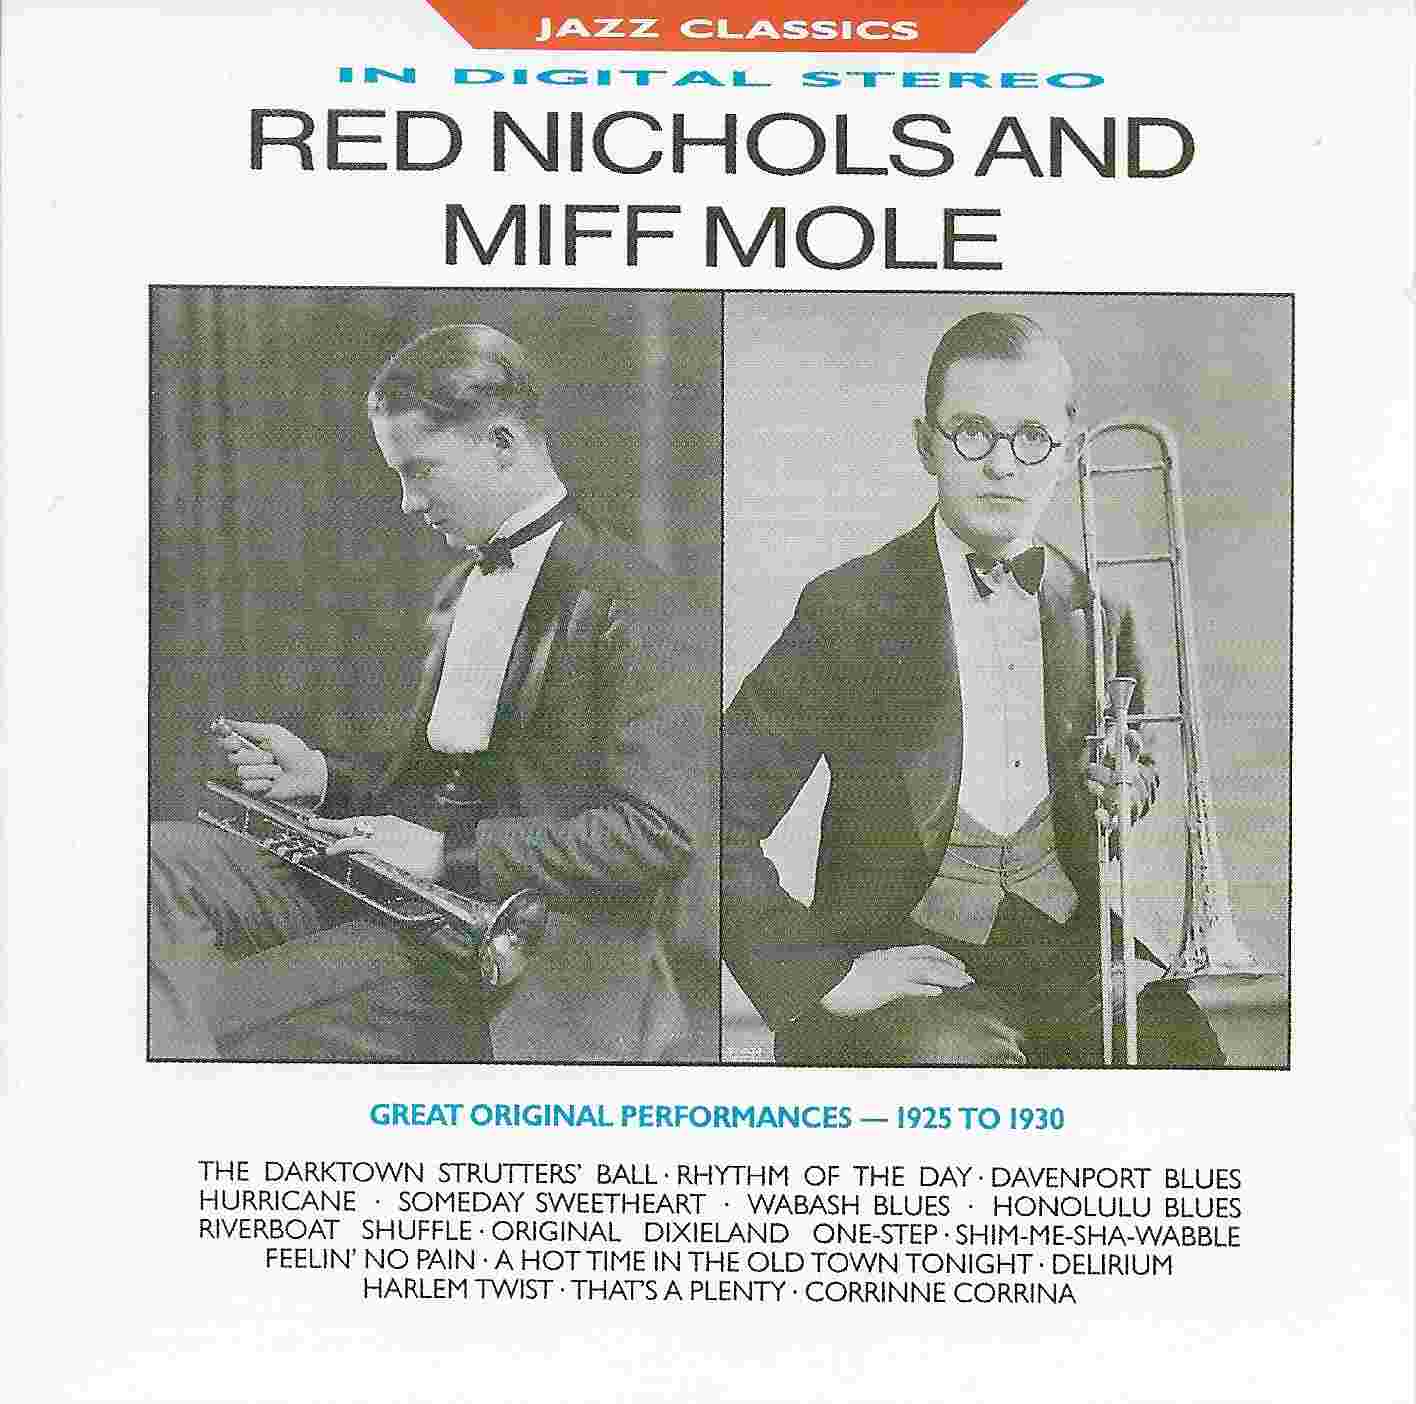 Picture of Jazz classics - Red Nichols and Miff Mole by artist Nichols / Mole from the BBC cds - Records and Tapes library